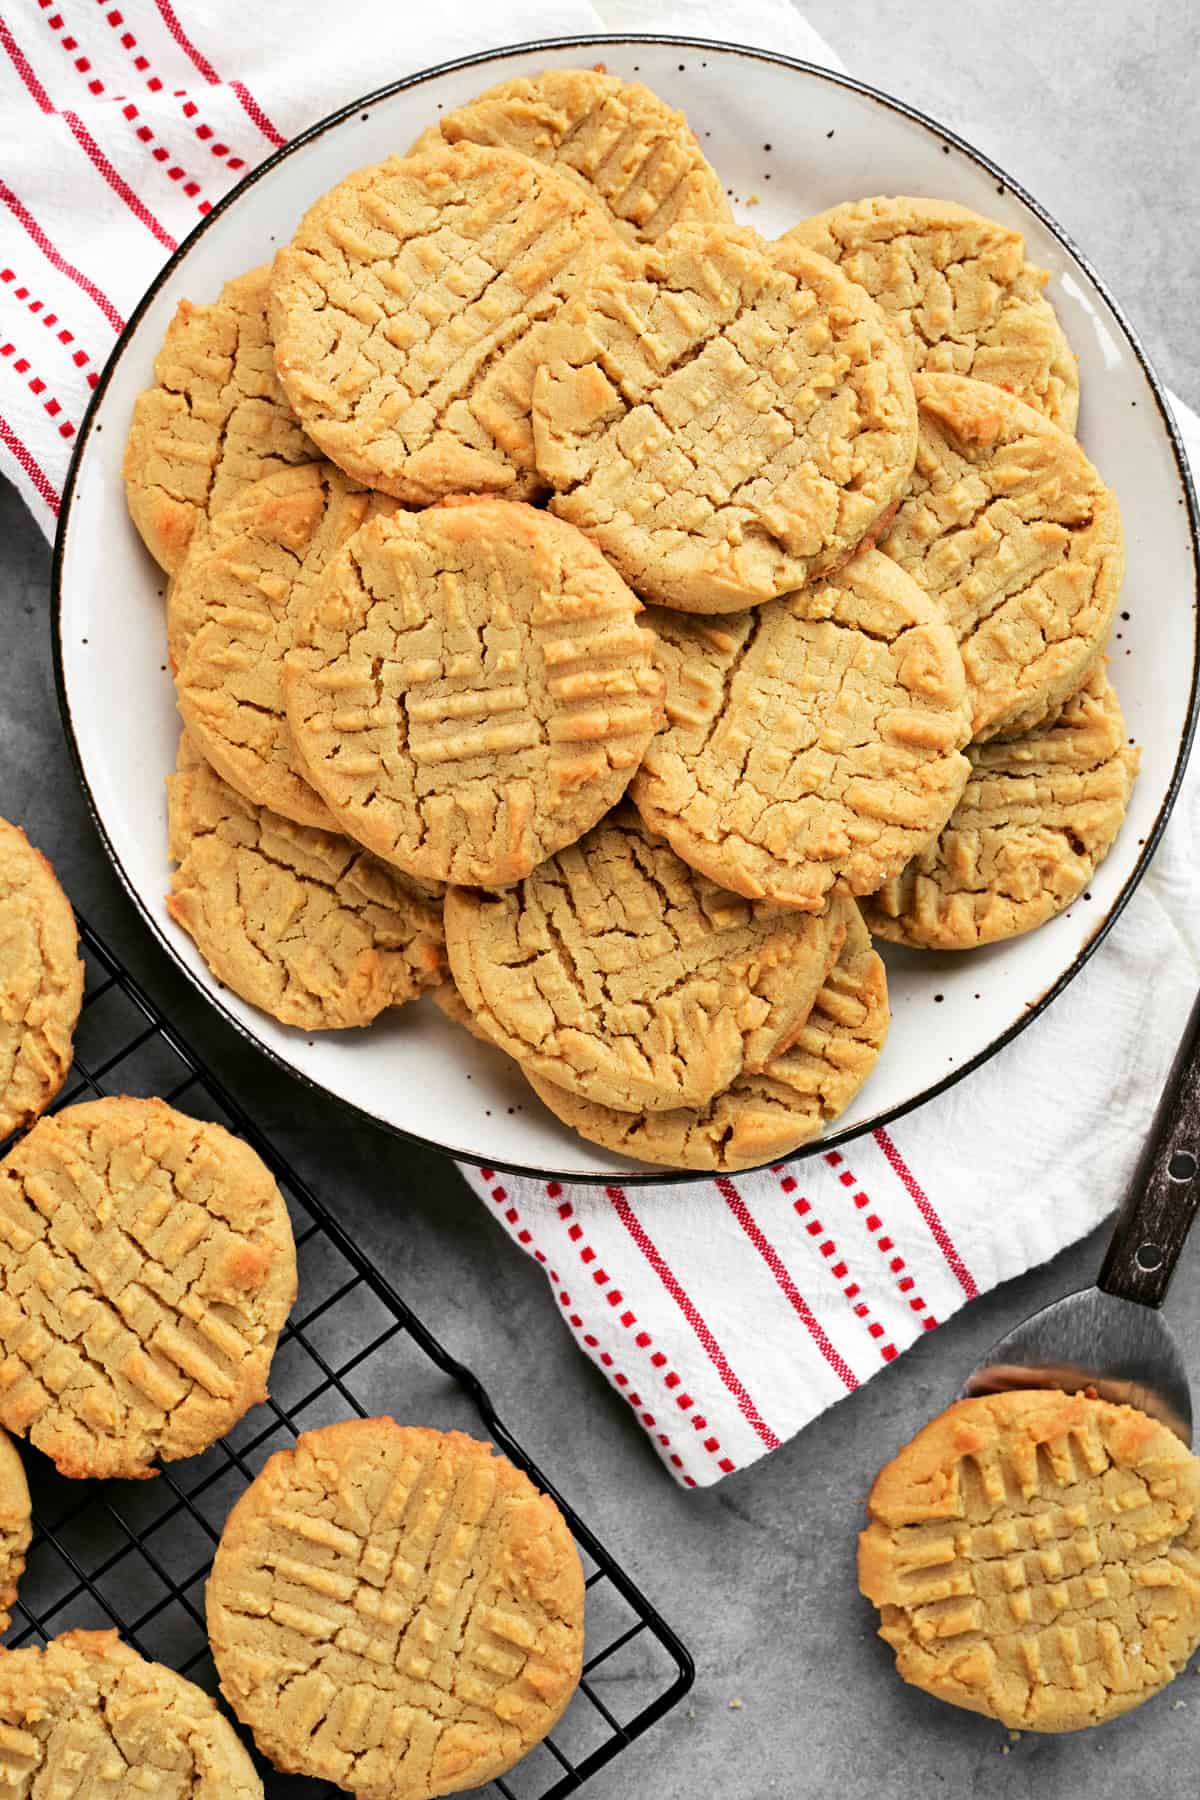 Peanut butter cookies on a rack and cookies on a plate.